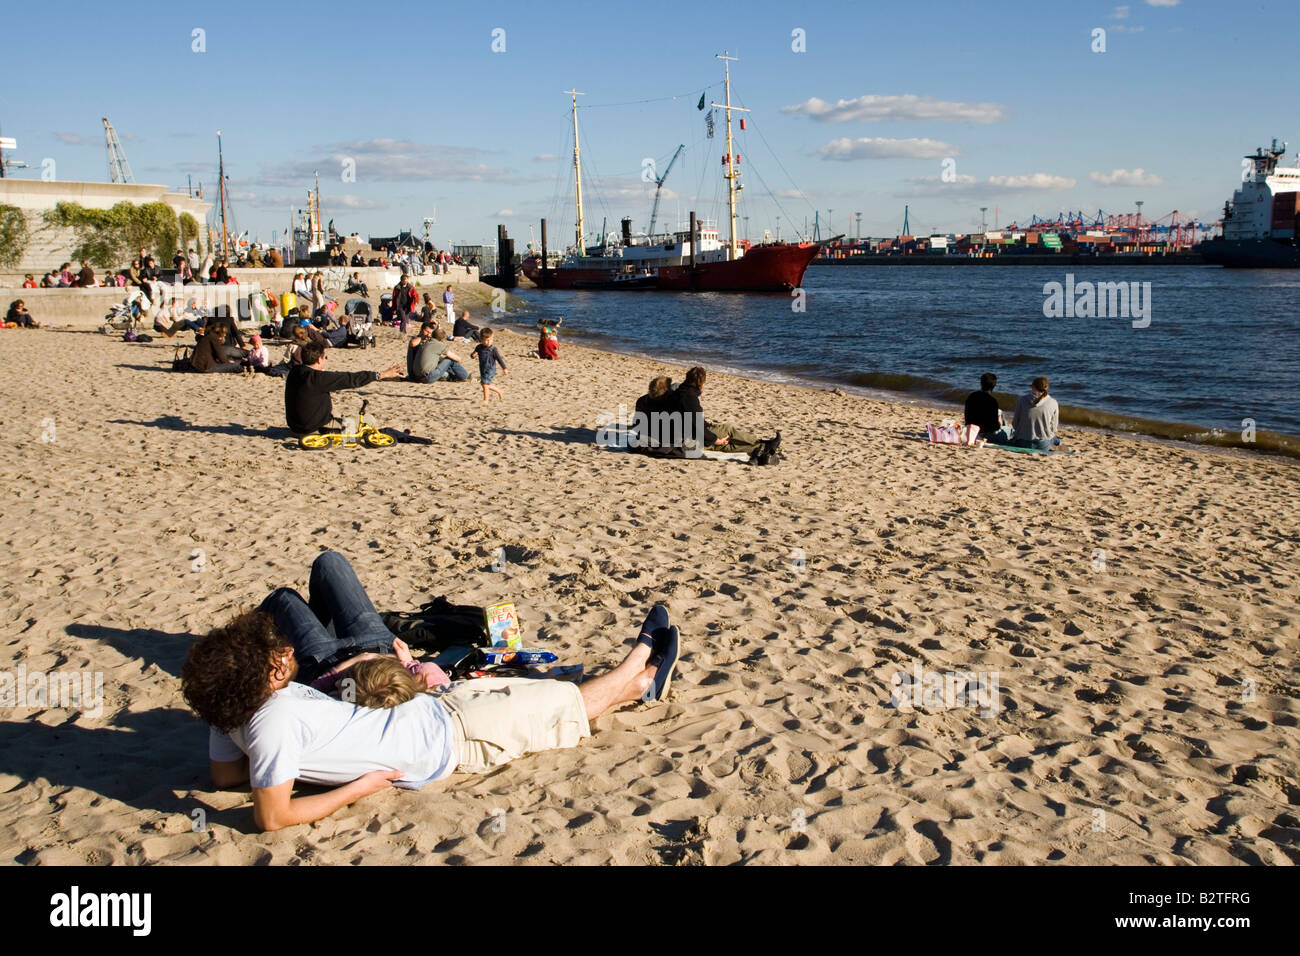 People relaxing at beach, People relaxing at Elbe beach, Oevelgoenne, Hamburg, Germany Stock Photo